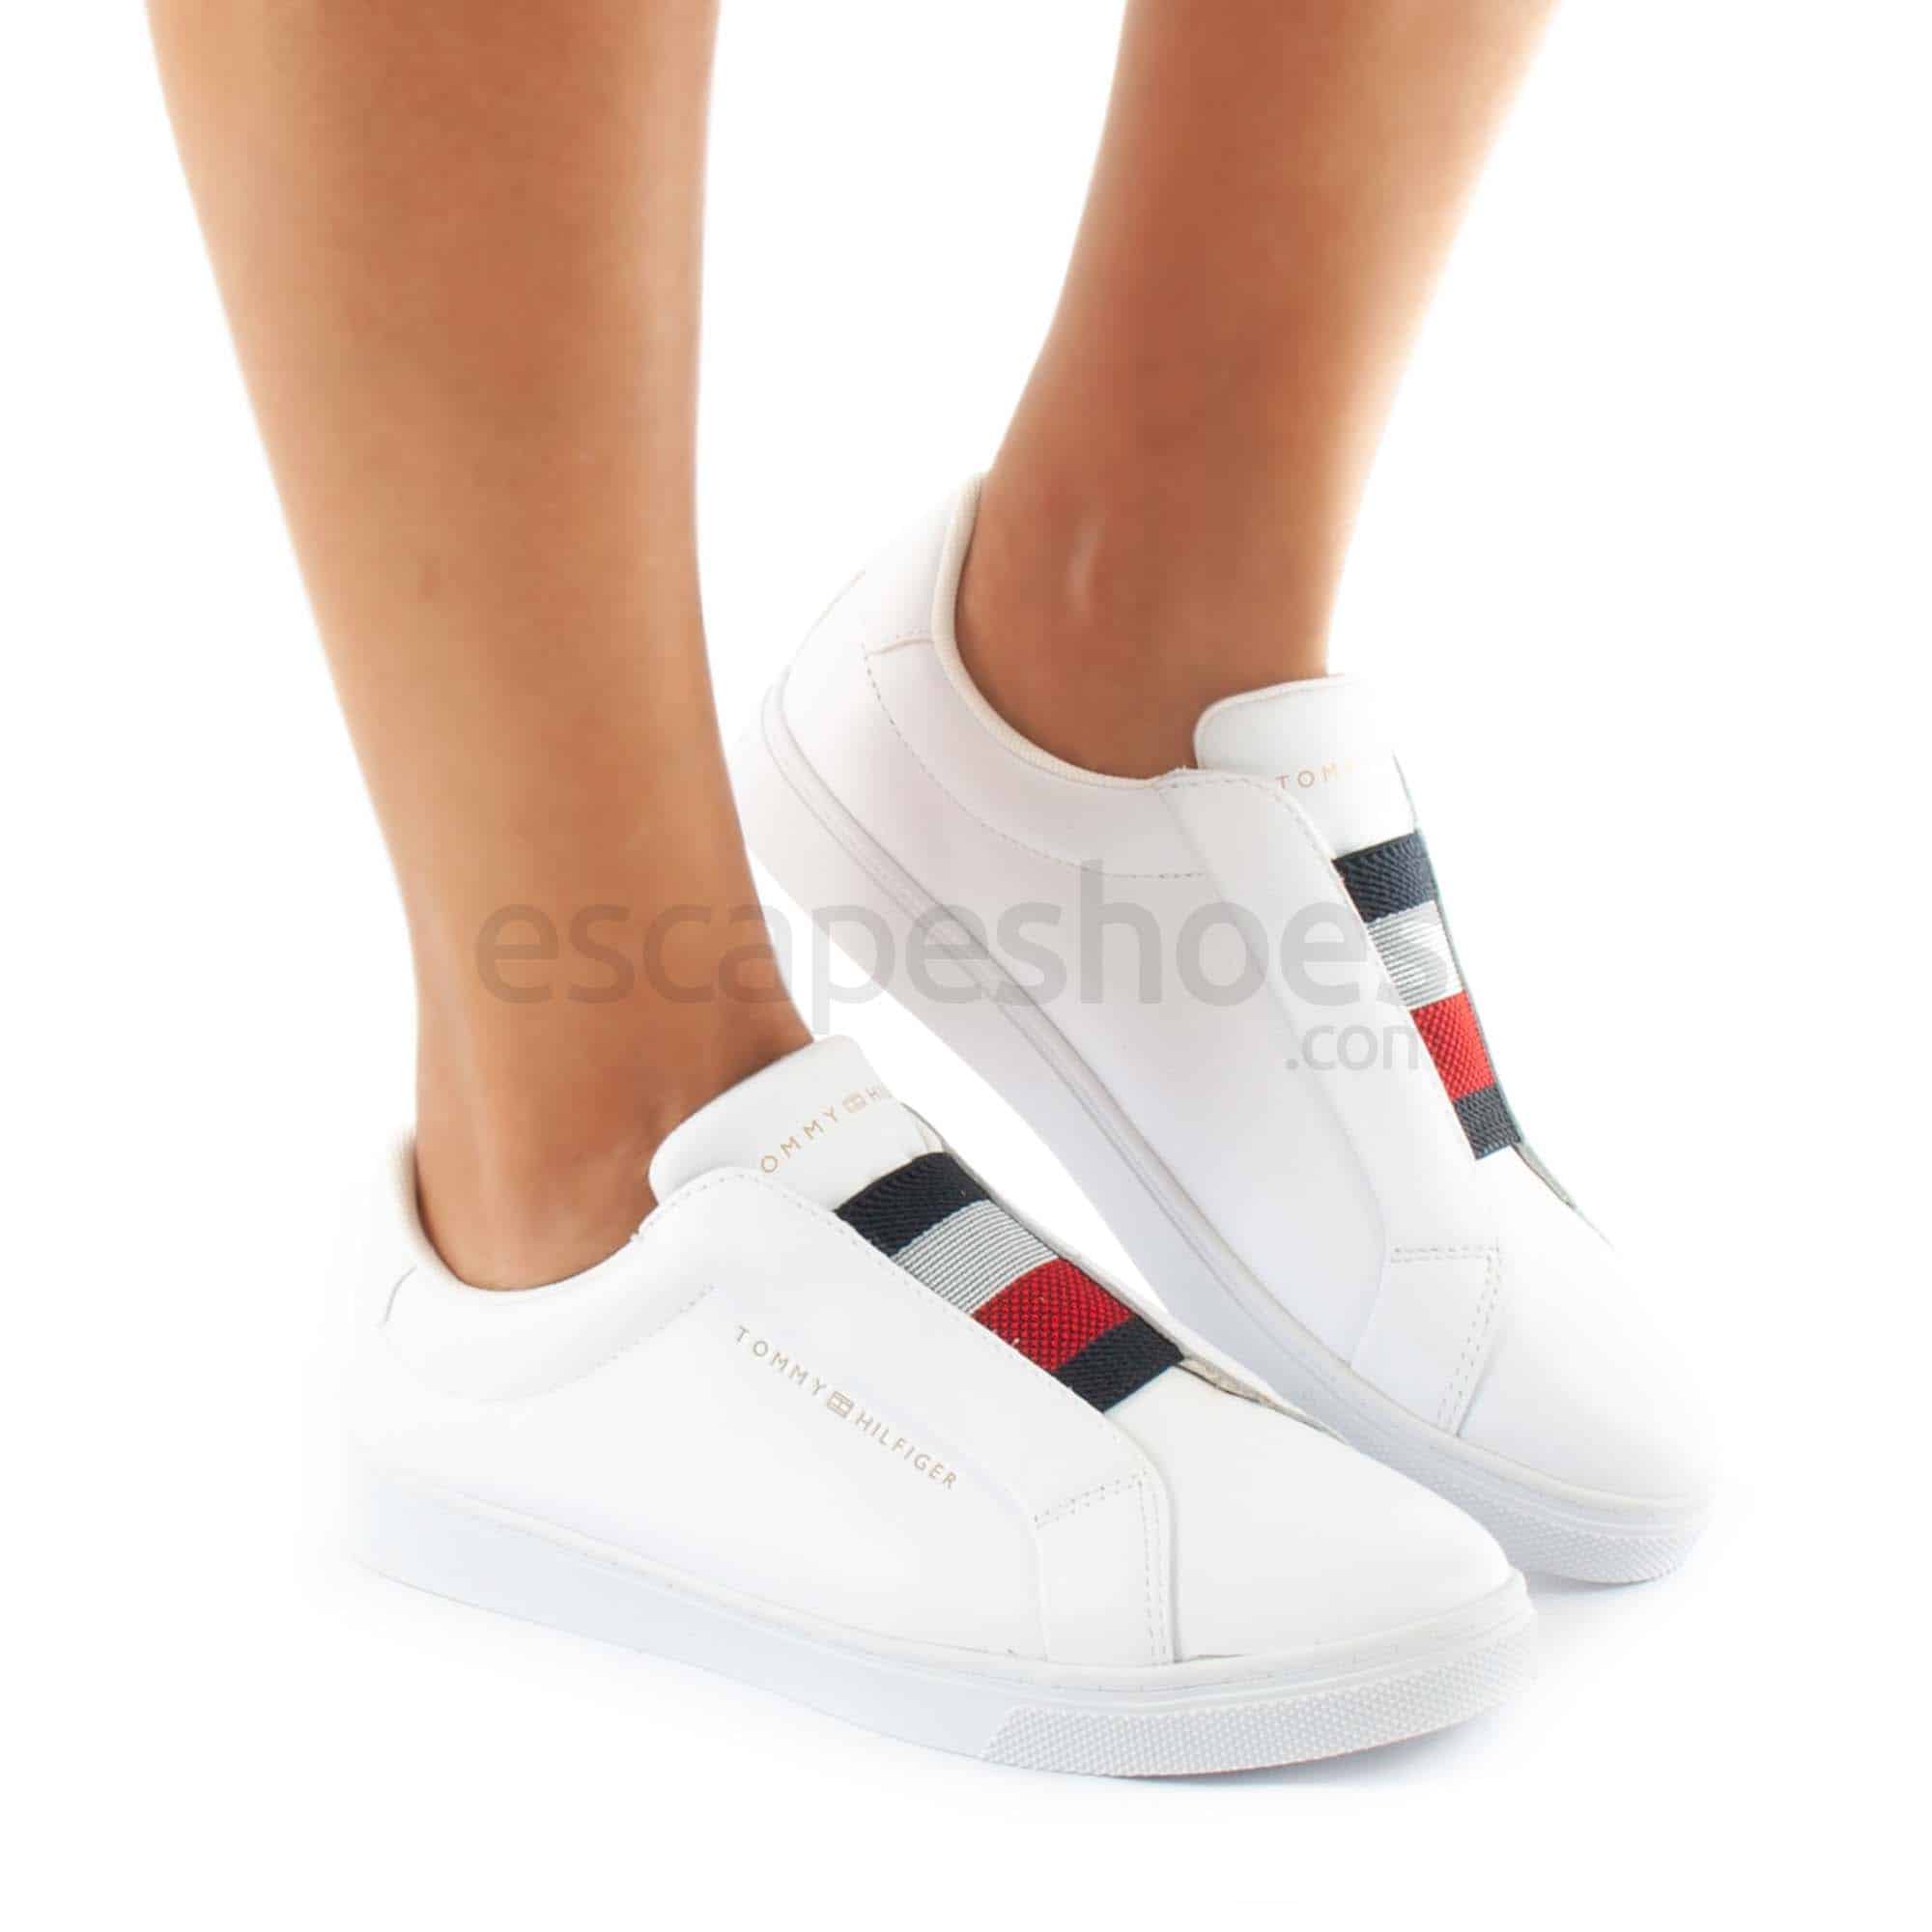 Sneaker Tommy Hilfiger  Zapatos tommy hilfiger mujer, Zapatos tenis para  mujer, Zapatos deportivos mujer